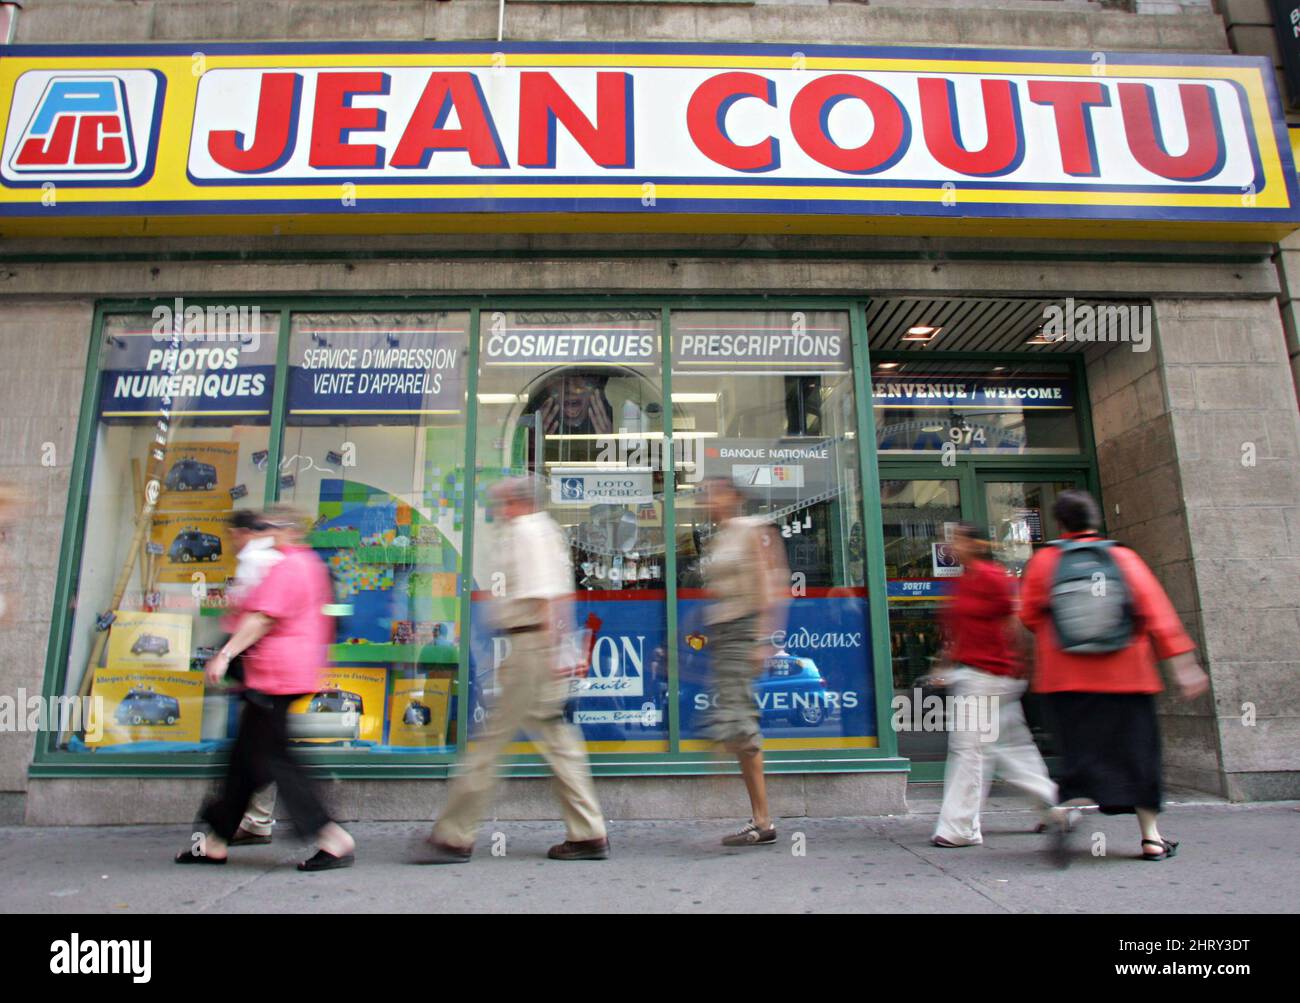 FILE--Pedestrians walk past a Jean Coutu pharmacy in Montreal, Thursday,  Sept. 15, 2005. The Jean Coutu Group more than quadrupled its first-quarter  profit, as the Quebec-based pharmacy chain increased revenue and continued